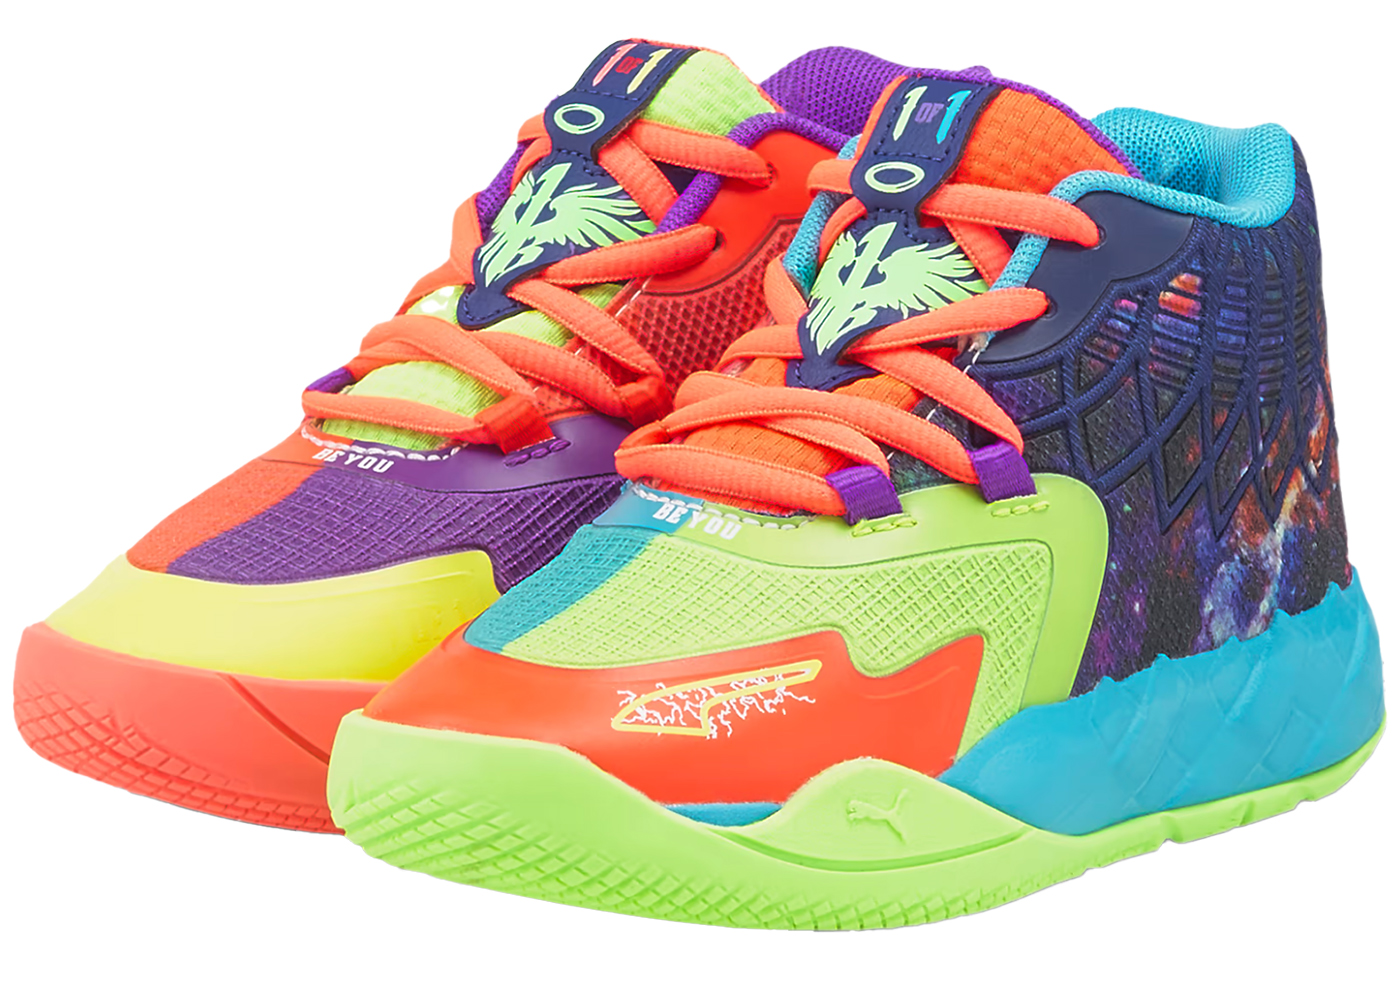 Puma LaMelo Ball MB.01 Be You (PS) キッズ - 385733-01 - JP